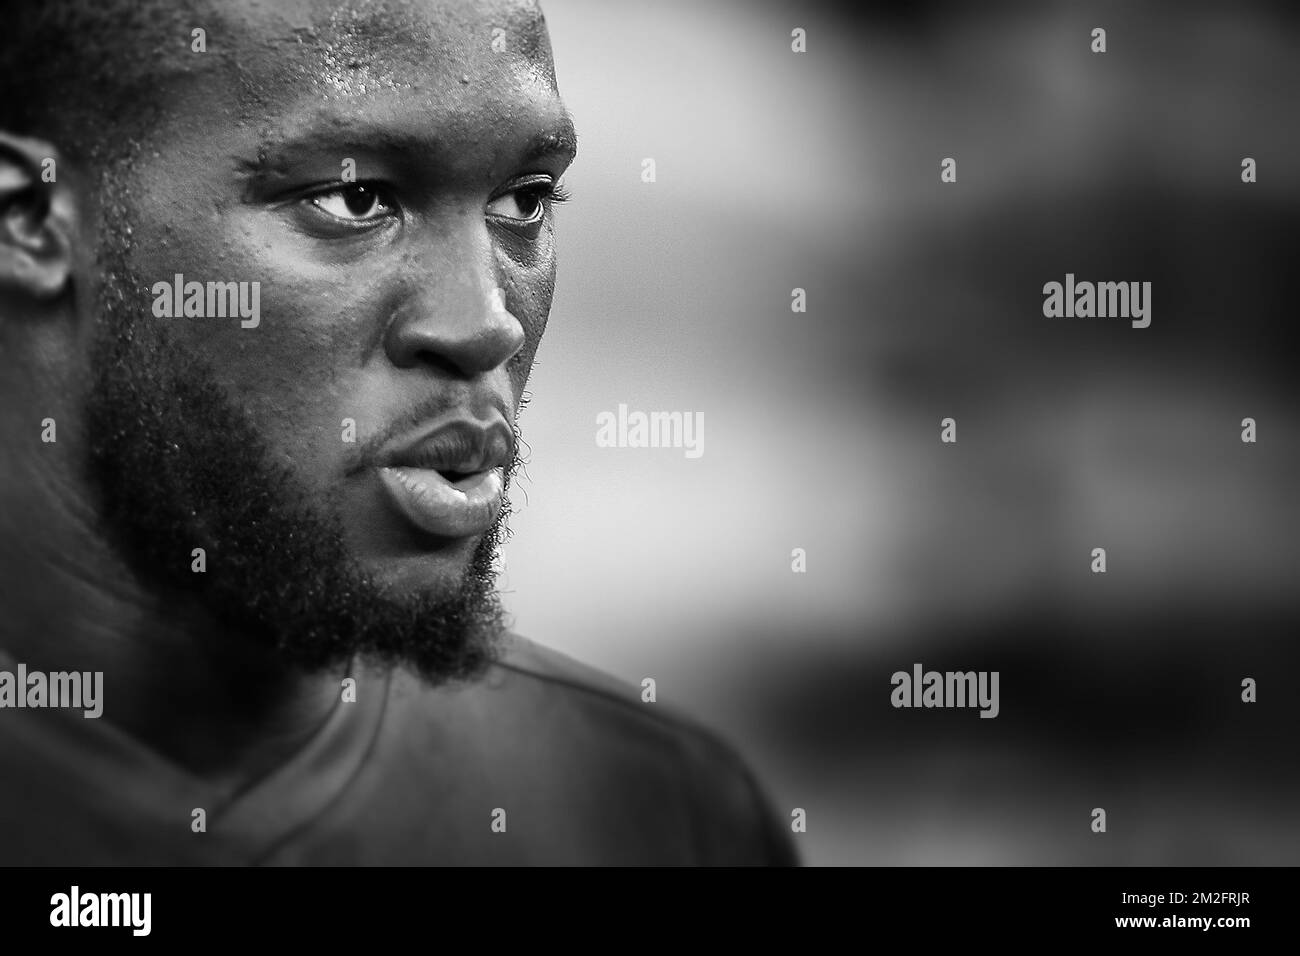 Belgium's Romelu Lukaku pictured during a friendly soccer game between Belgian national team Red Devils and Portugal, Saturday 02 June 2018, in Brussels. The teams are preparing for the upcoming FIFA World Cup 2018 in Russia. BELGA PHOTO BRUNO FAHY Stock Photo